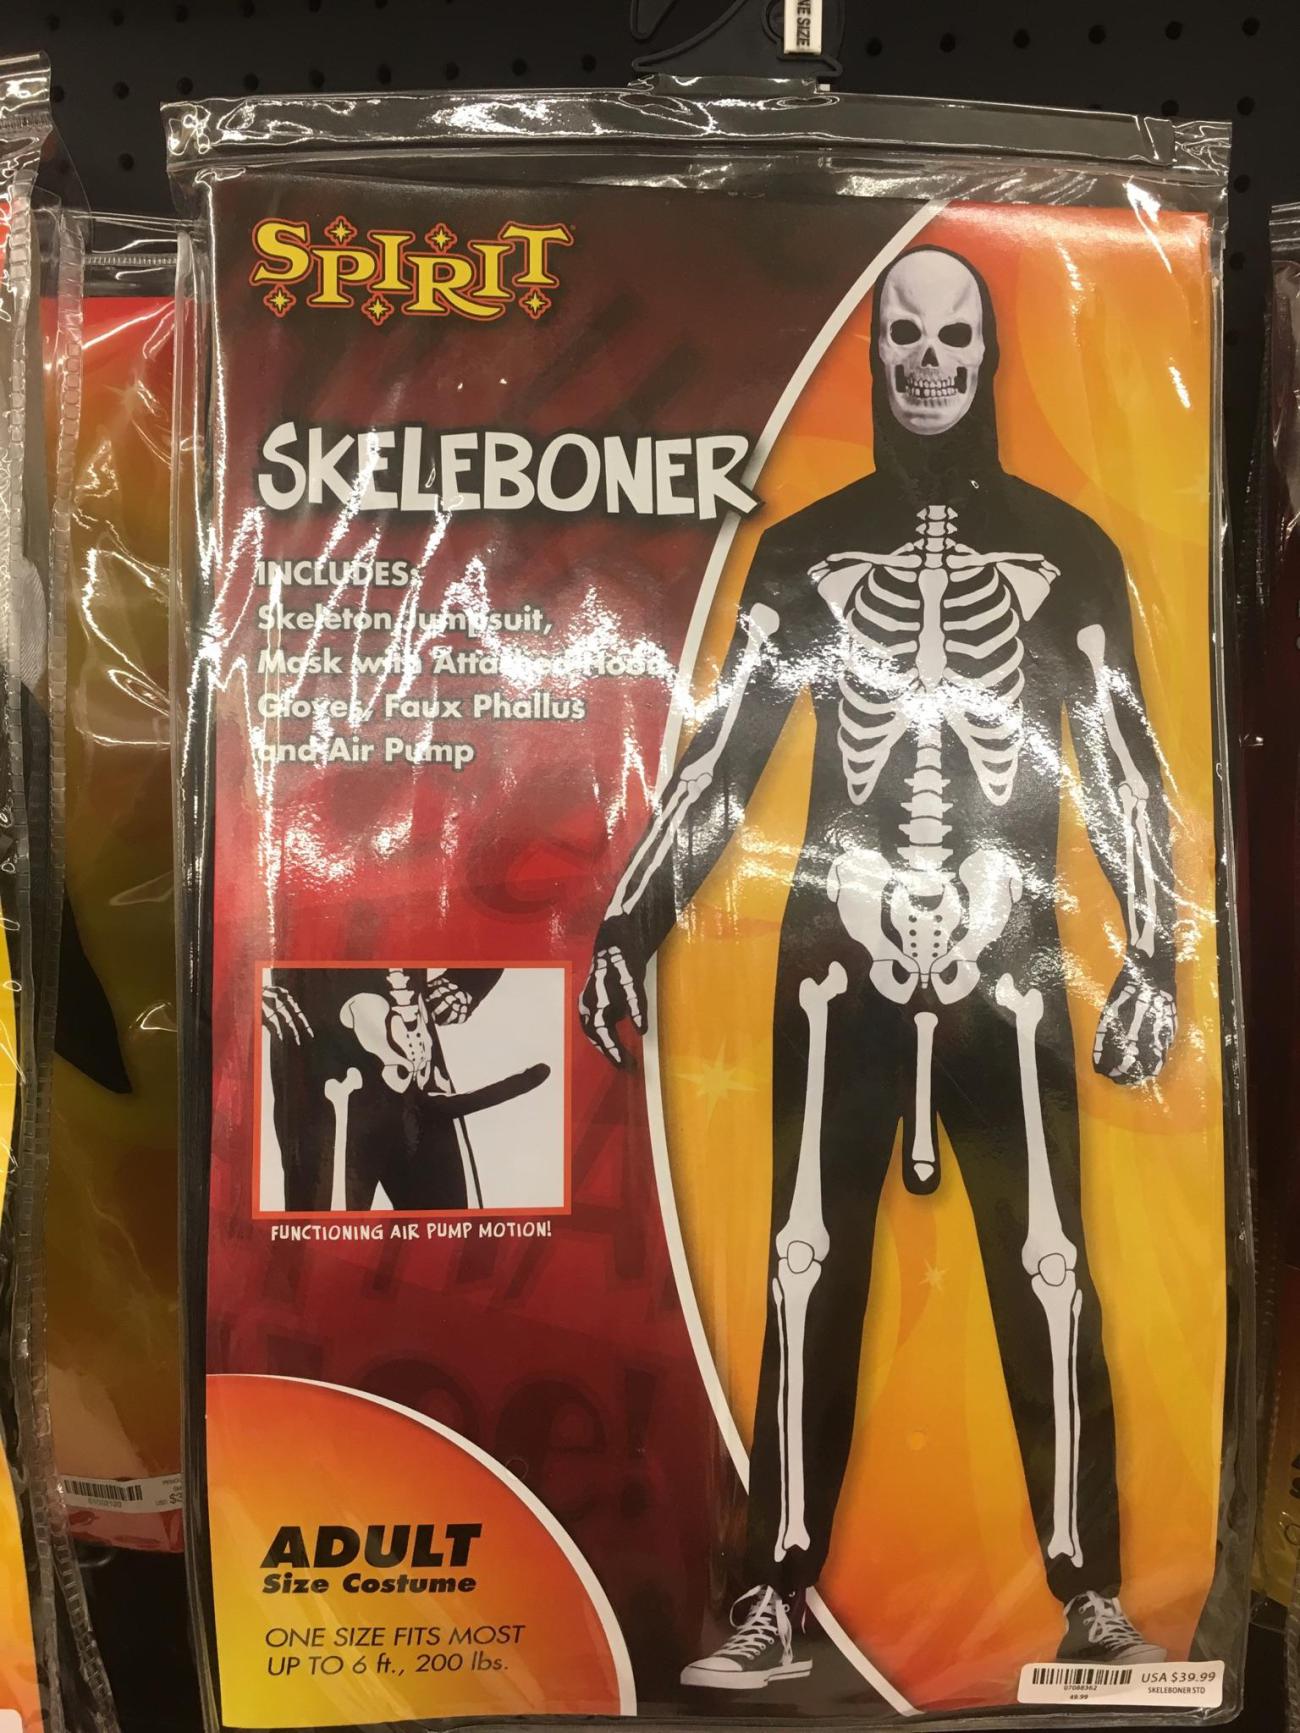 action figure - Ne Size Spirit Skeleboner Includes Skeleton dumosuit, Mask si Atta Gloves Faux Phallus and Air Pump Functioning Air Pump Motion! S . Adult Size Costume One Size Fits Most Up To 6 ft., 200 lbs. I L I Niin Usa $39.99 Srelesoner Sto